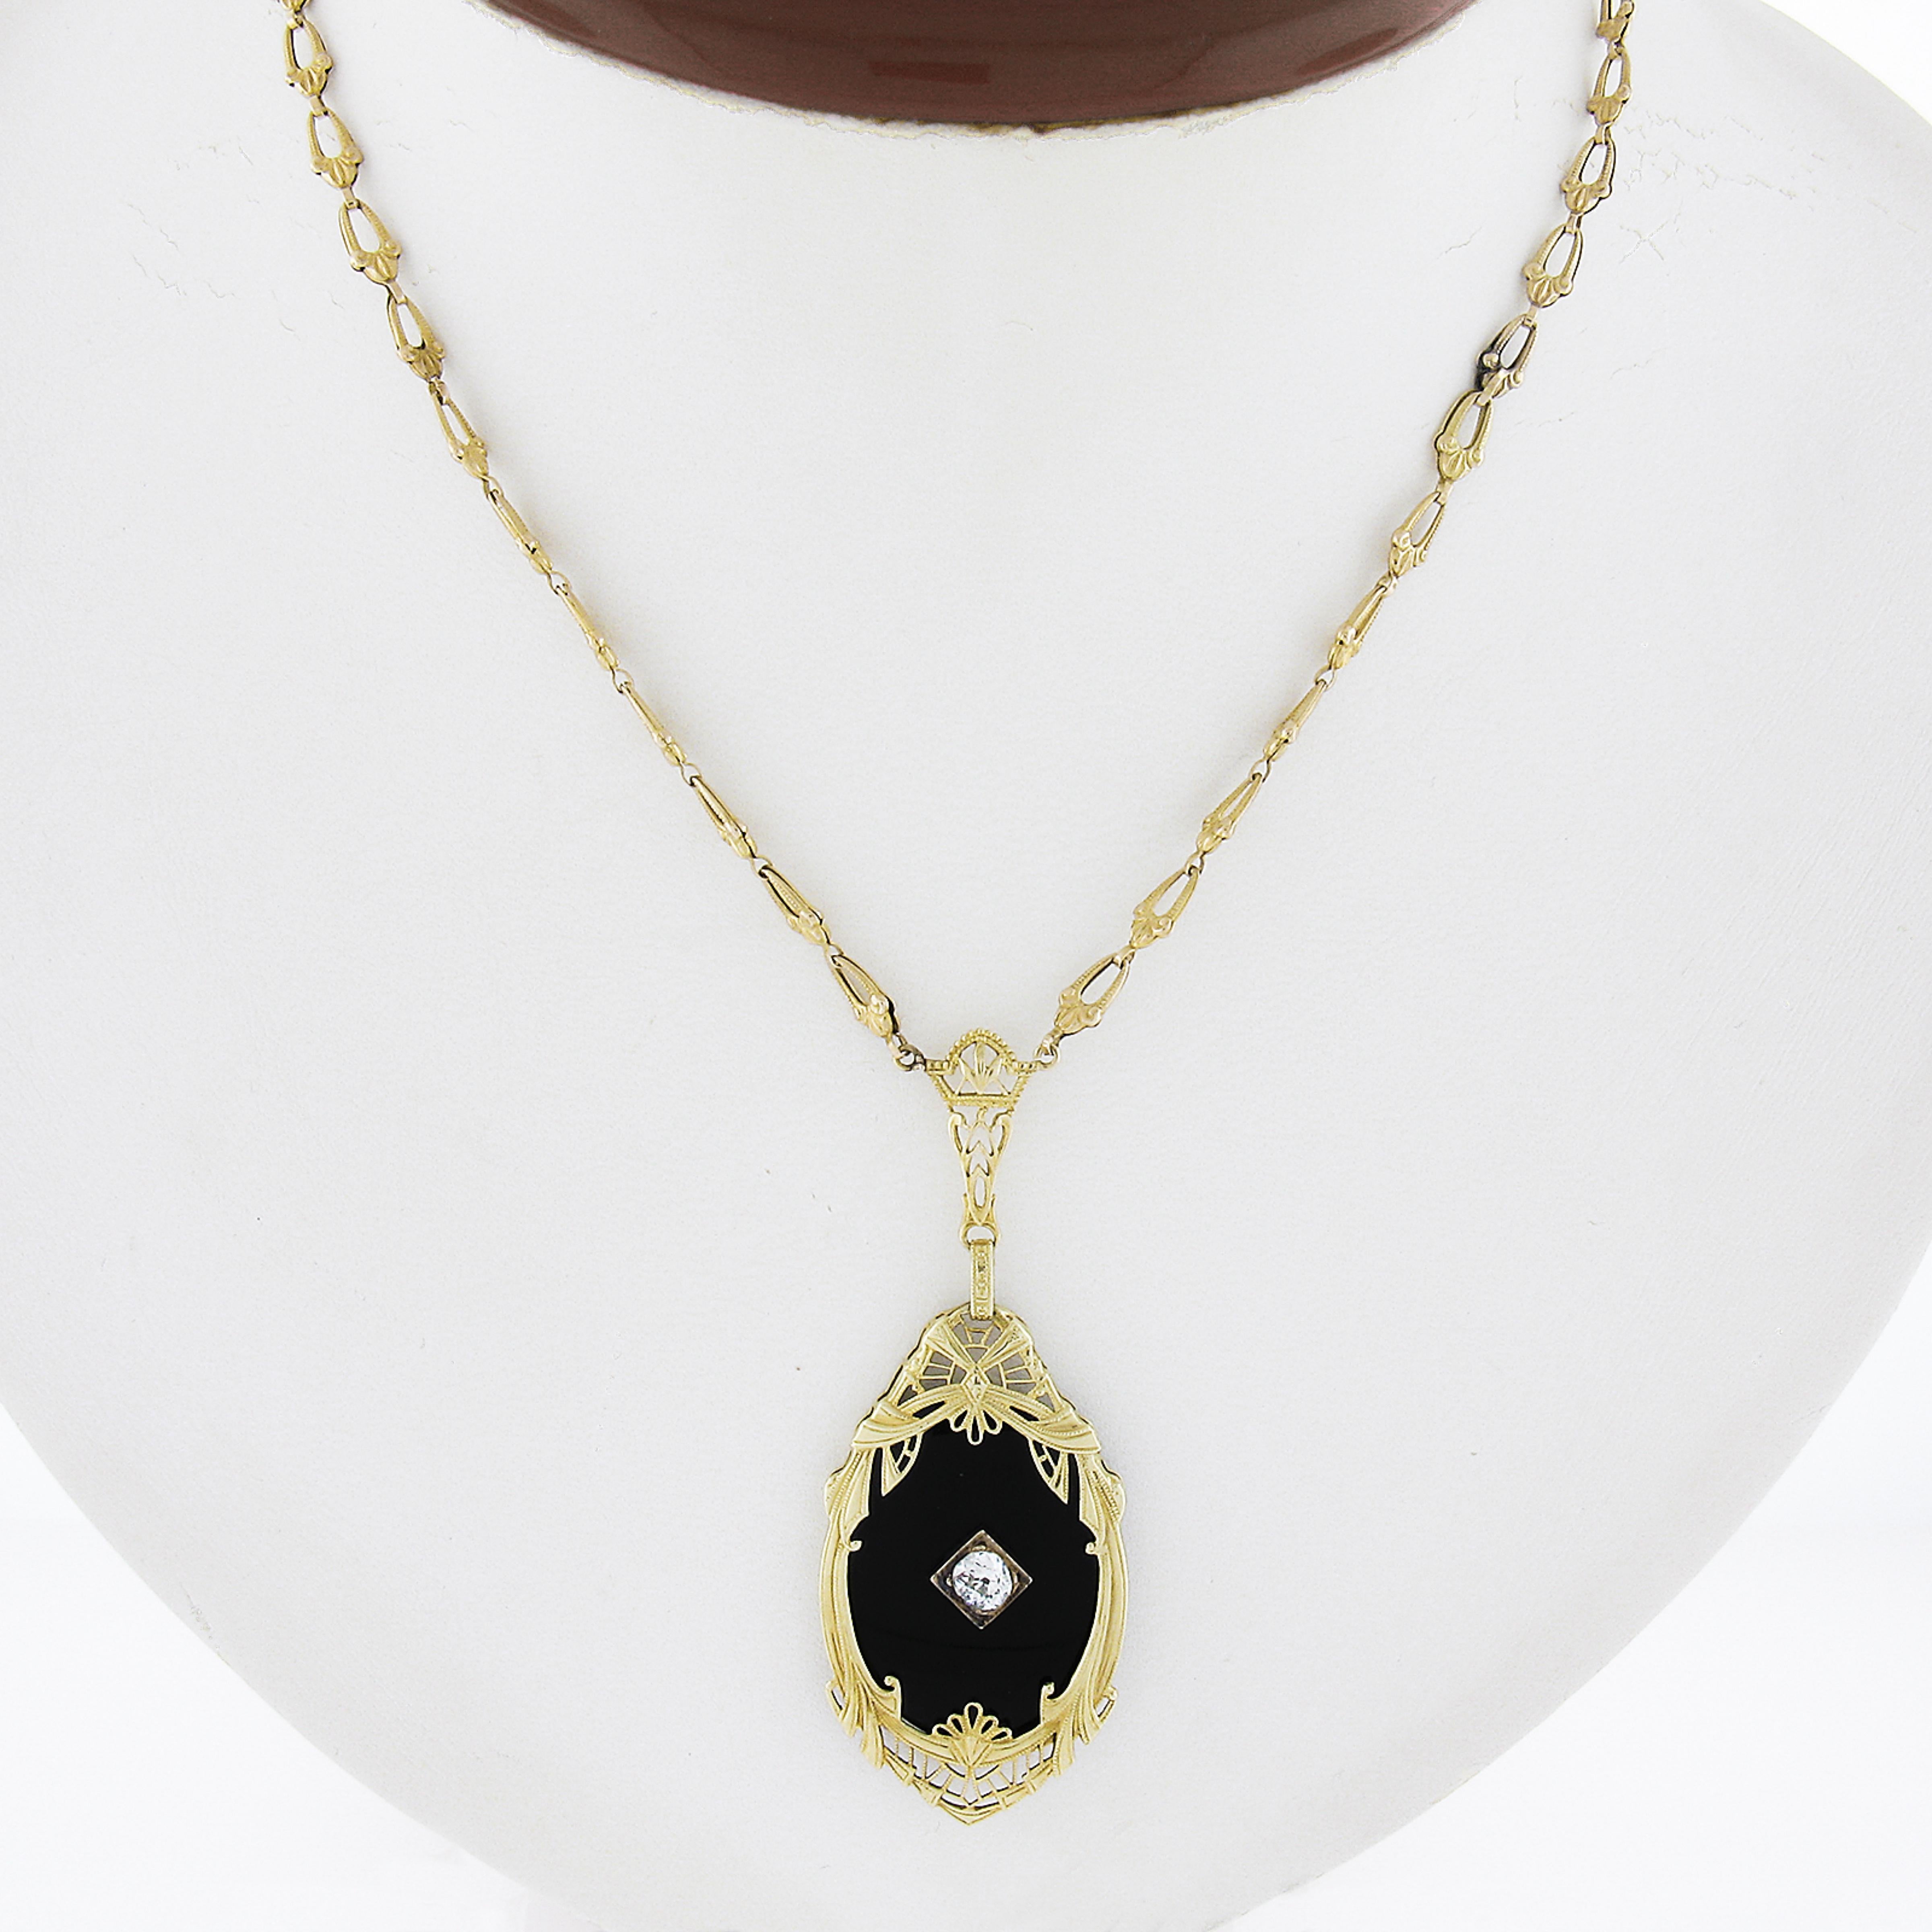 Very Rare to find these necklaces in yellow gold! Most were made in white and platinum. The yellow gold and black onyx combined with the masterful Art Deco Workmanship is truly something special! Enjoy!

--Stone(s):--
(1) Natural Genuine Black Onyx